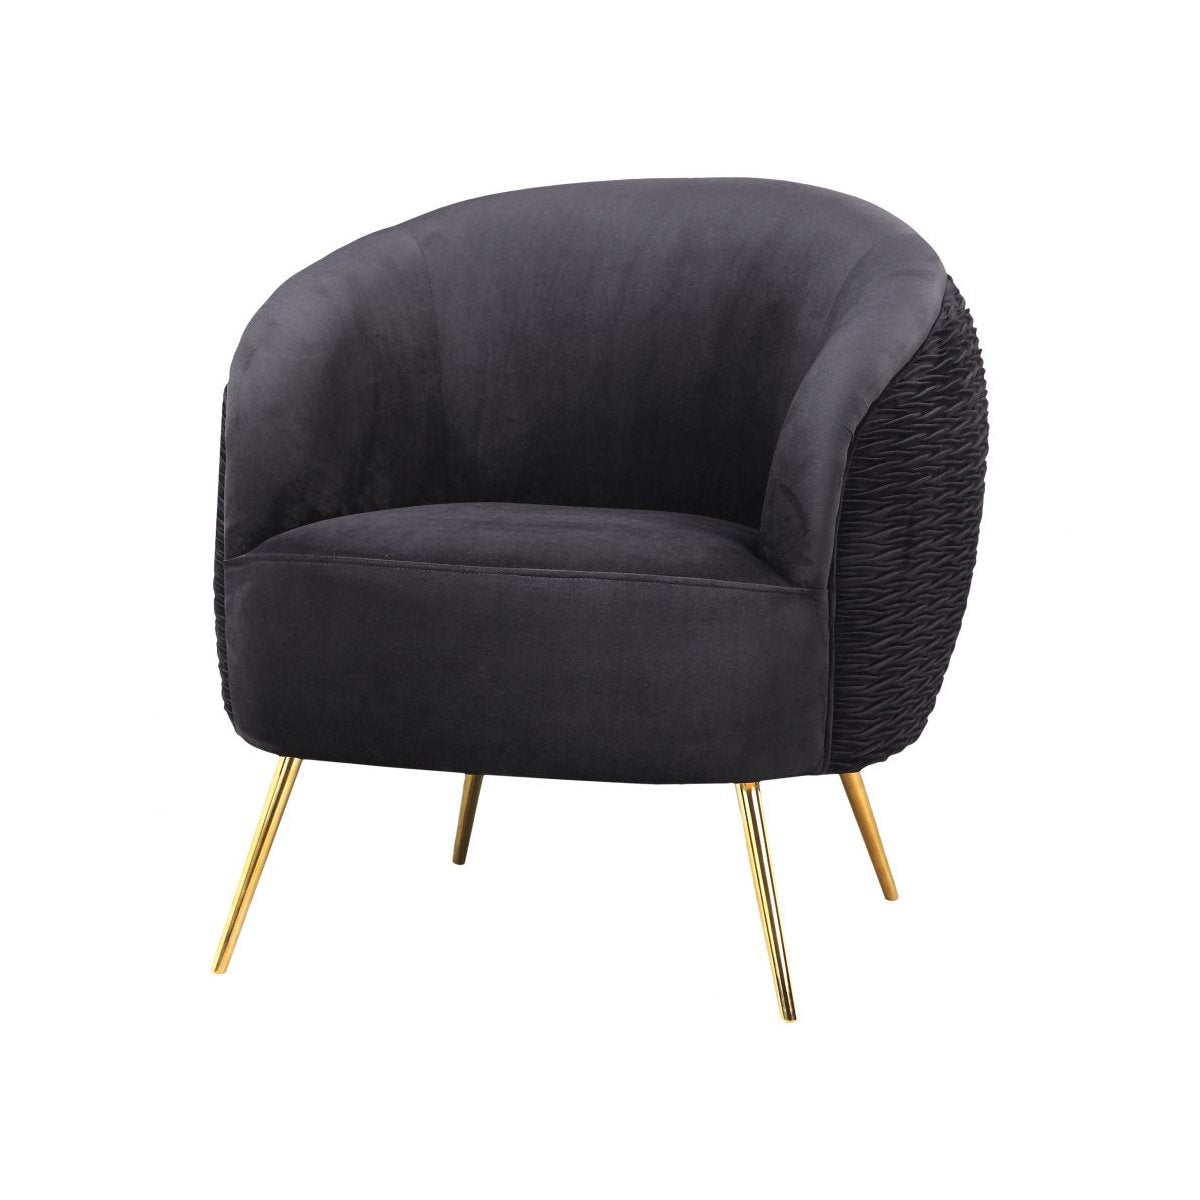 Load image into Gallery viewer, Sparro Lounge Chair Occasional Chairs Moe&amp;#39;s     Four Hands, Burke Decor, Mid Century Modern Furniture, Old Bones Furniture Company, Old Bones Co, Modern Mid Century, Designer Furniture, https://www.oldbonesco.com/
